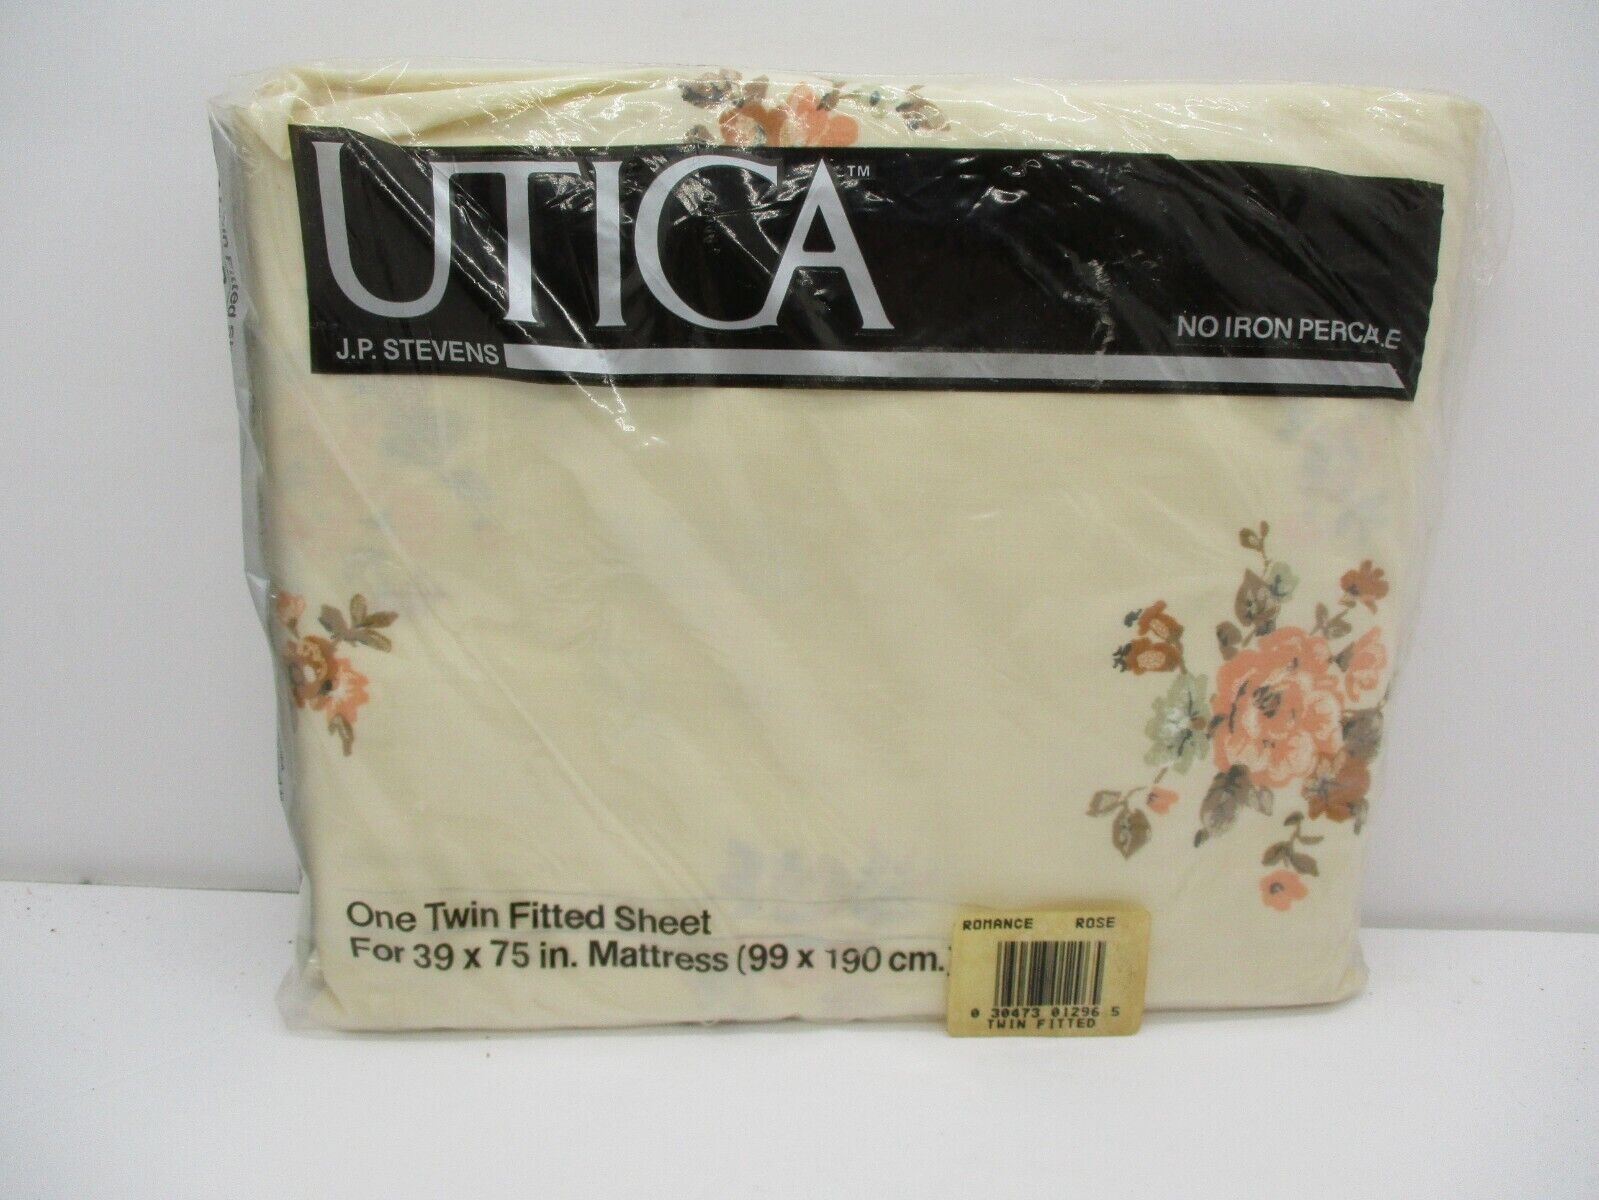 Vintage Stevens Utica No Iron Percale Fitted Twin Sheet Limoges Bone MUSTY SMELL